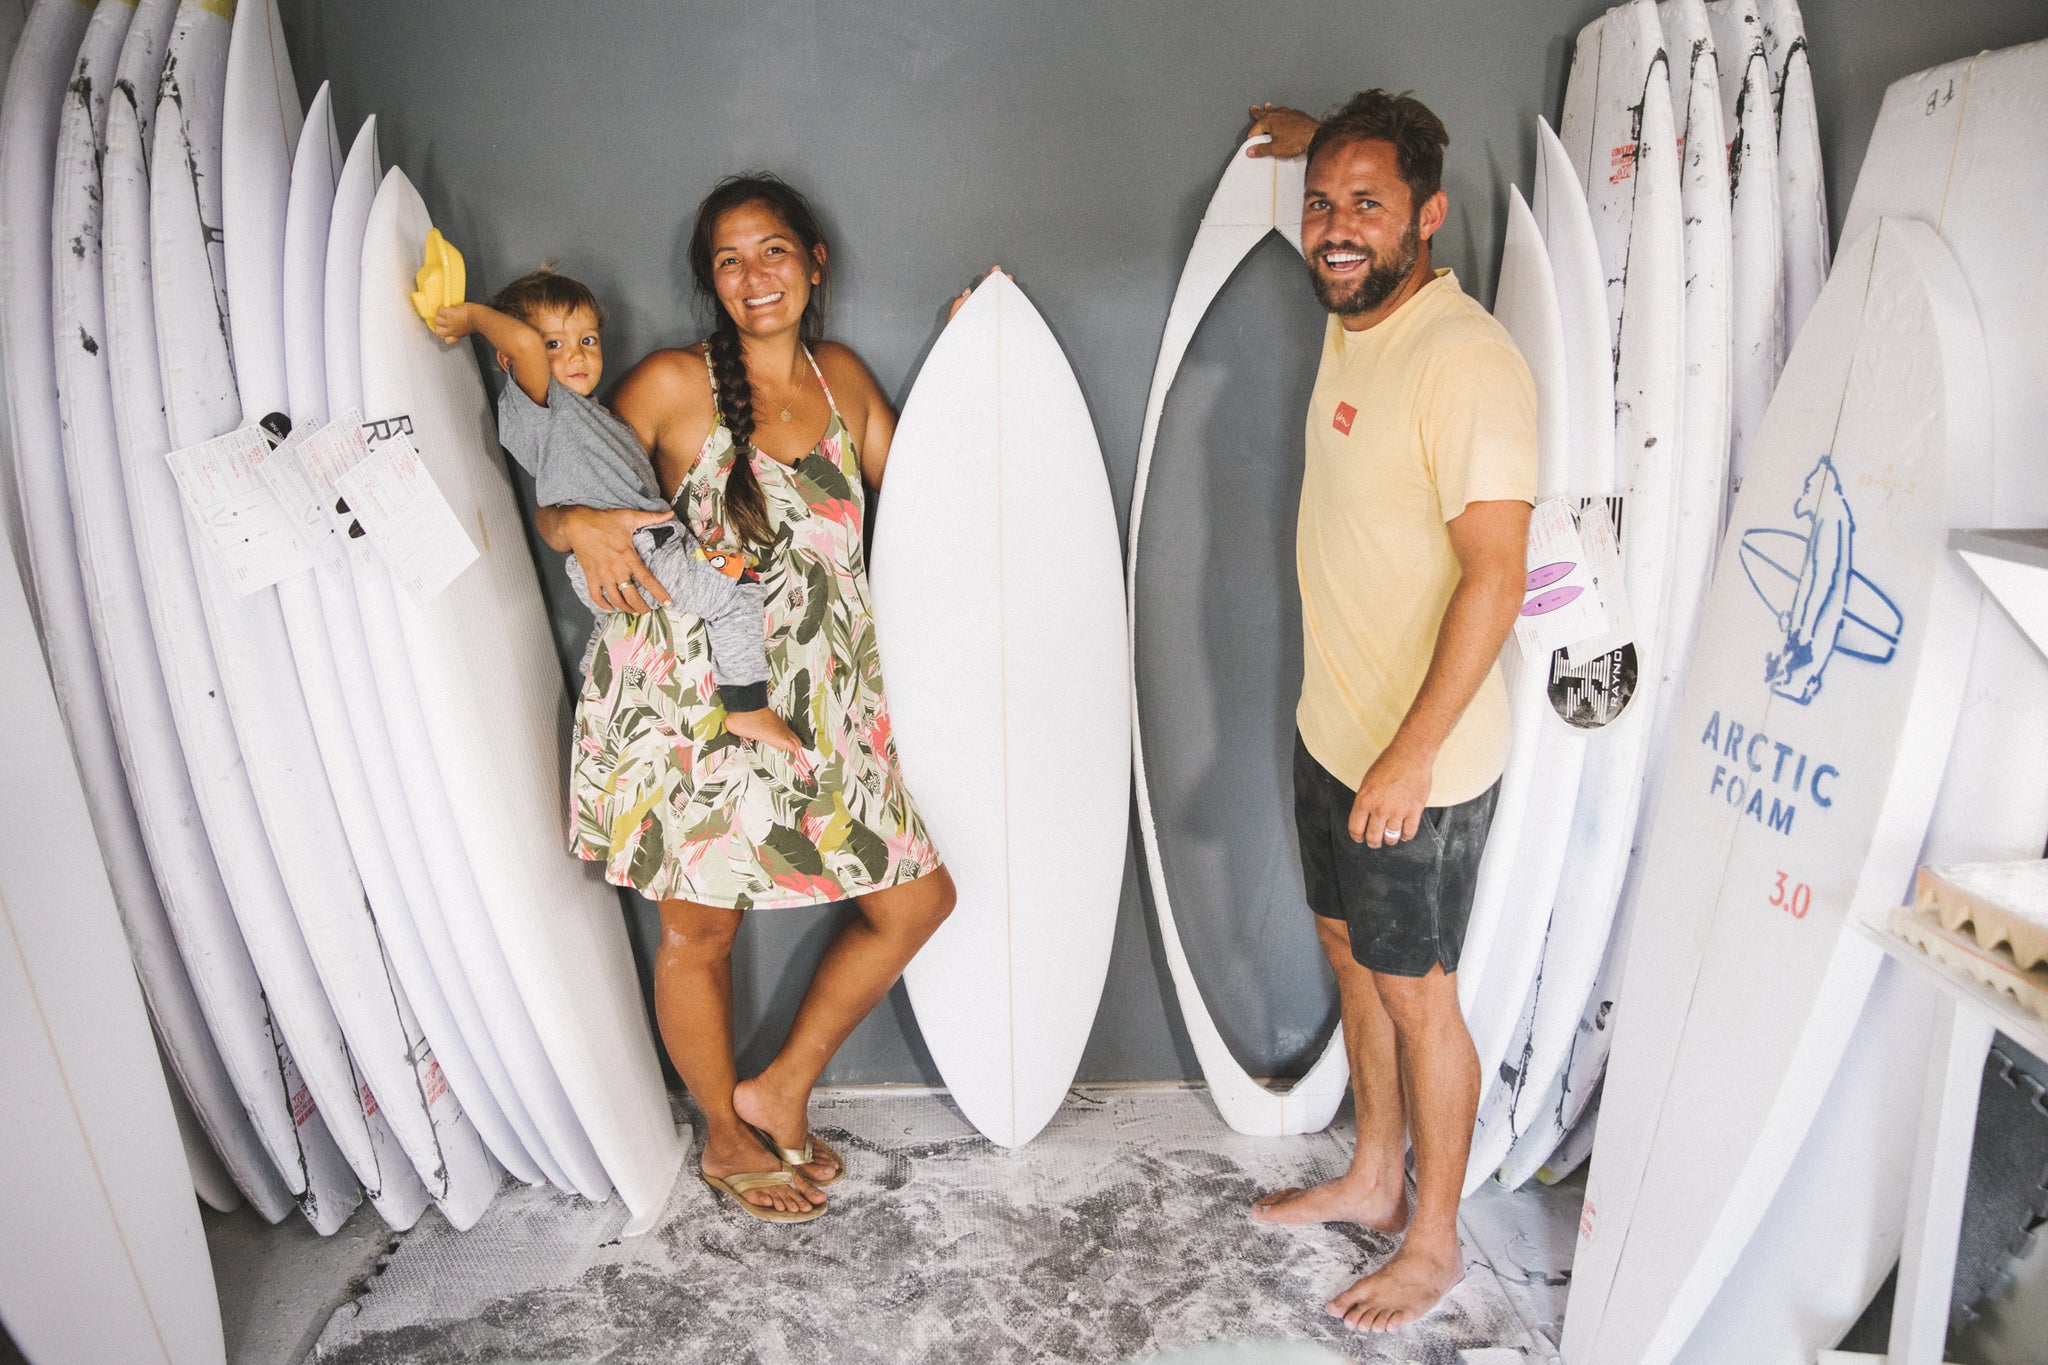 smiling people holding surfboards